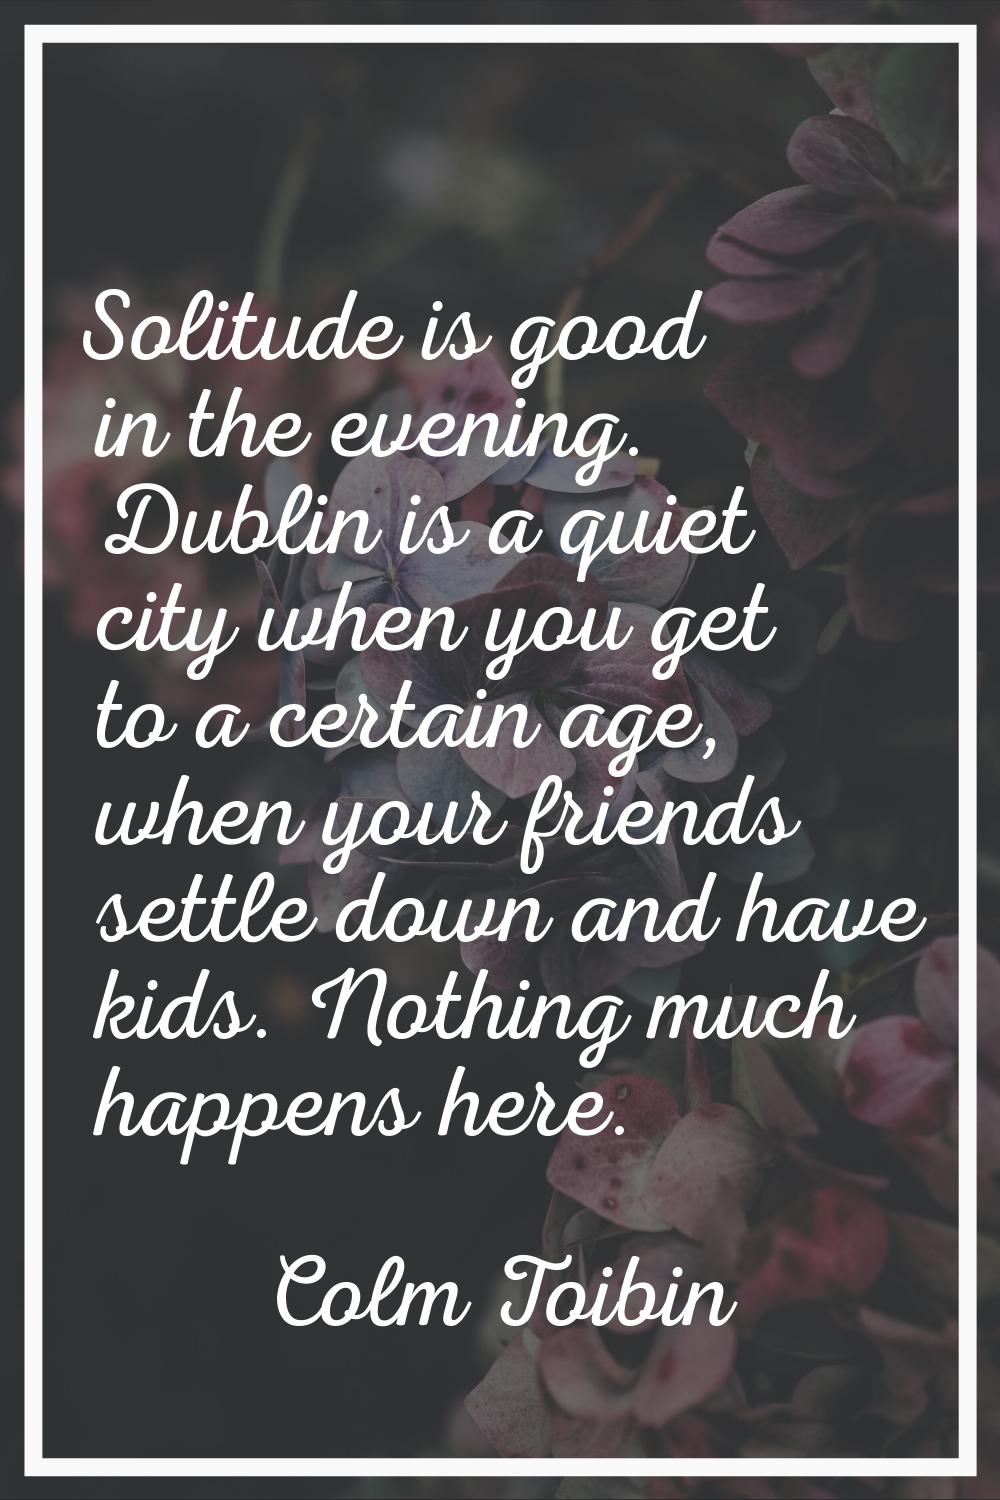 Solitude is good in the evening. Dublin is a quiet city when you get to a certain age, when your fr